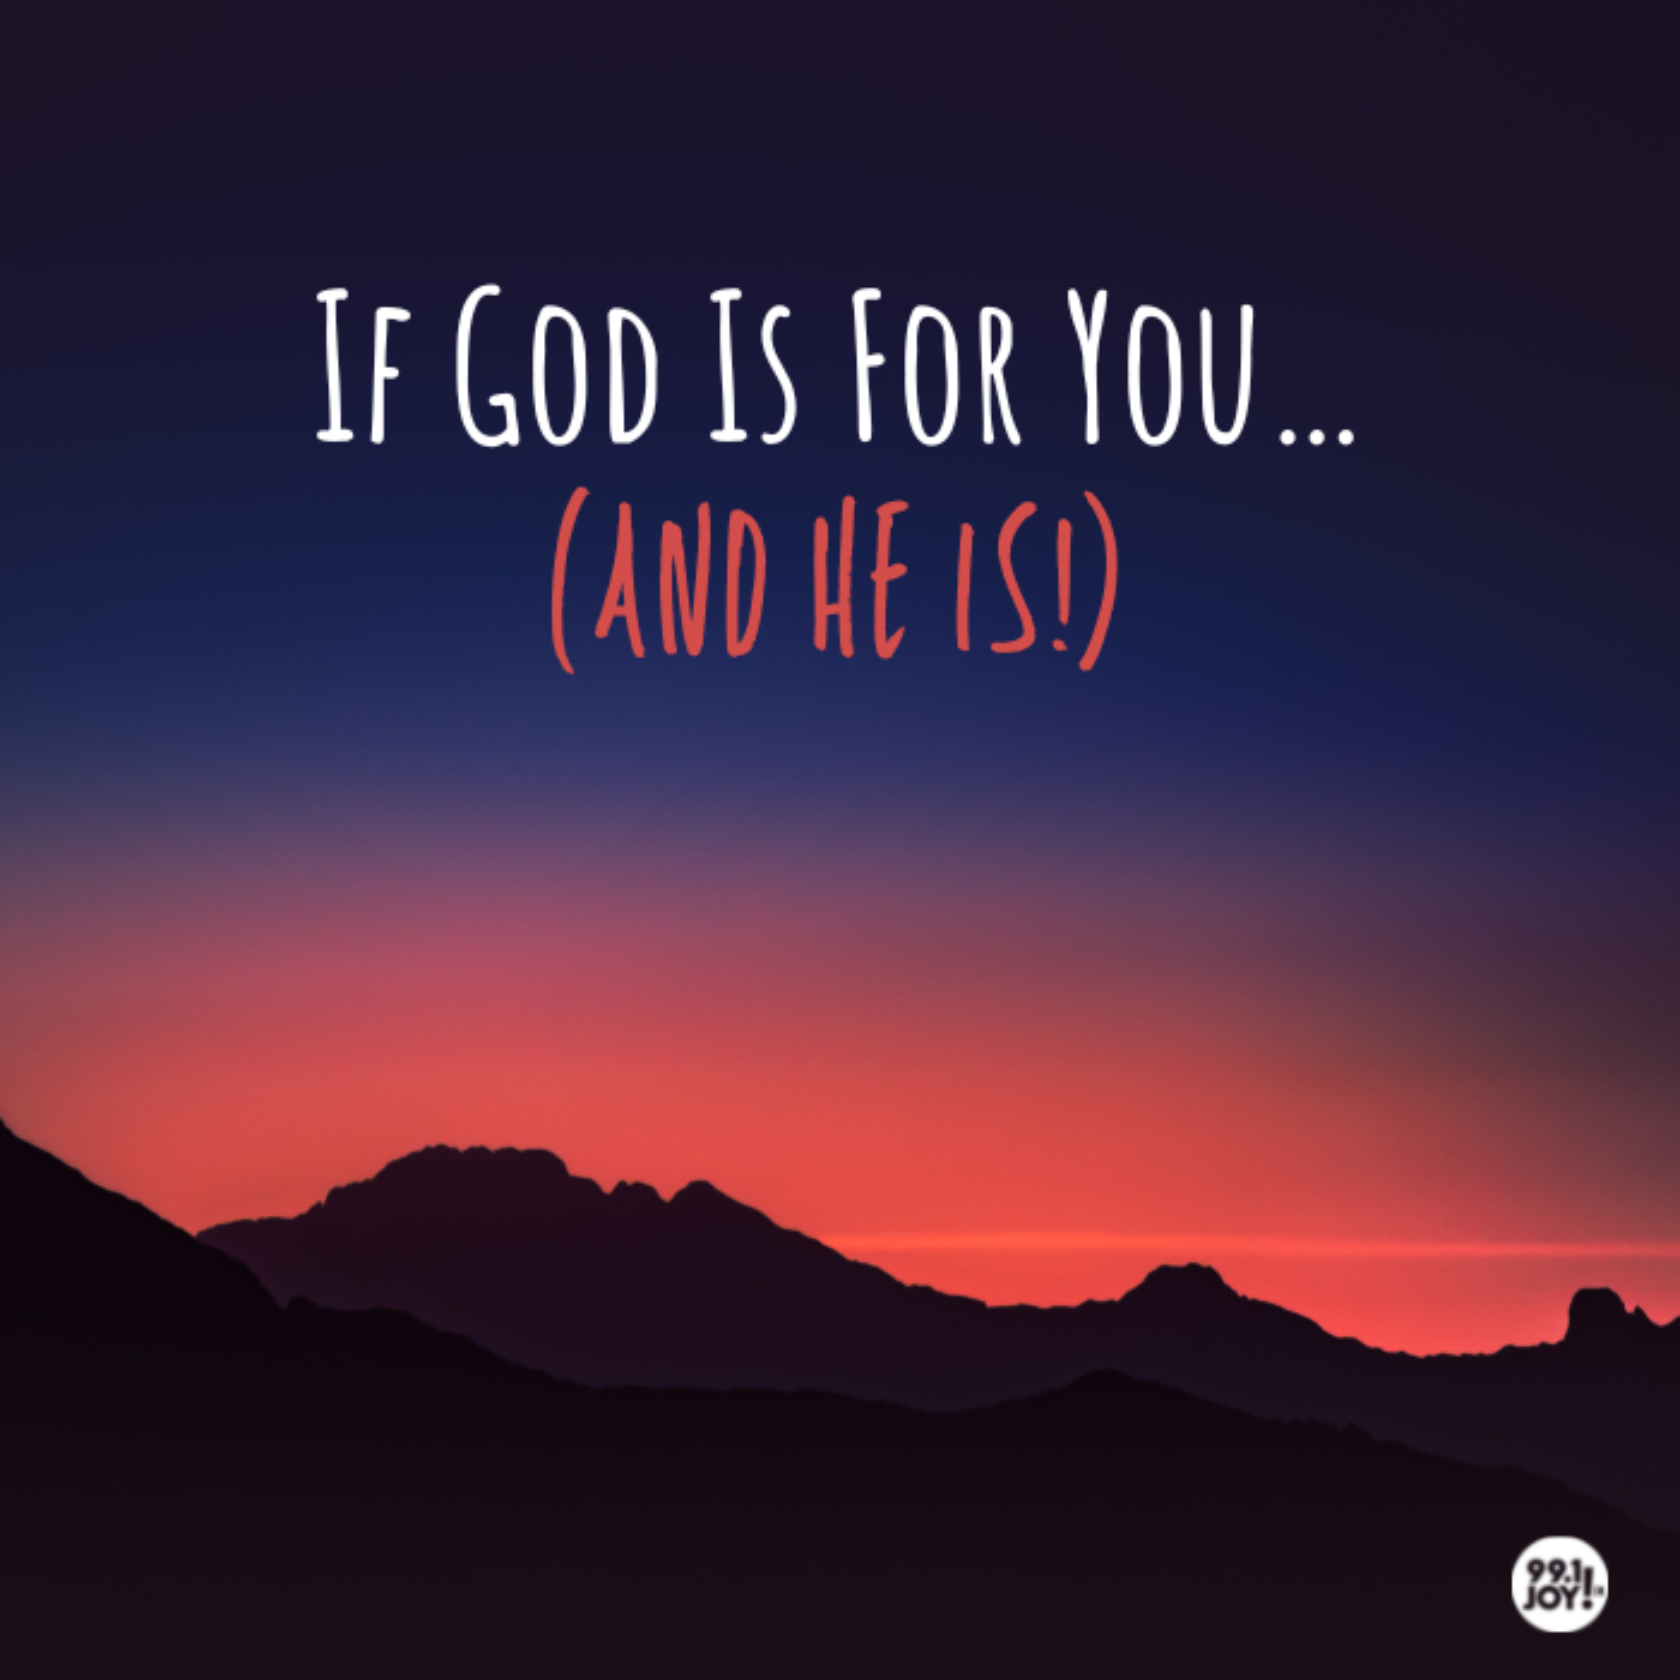 If God Is For You…(And He Is!)